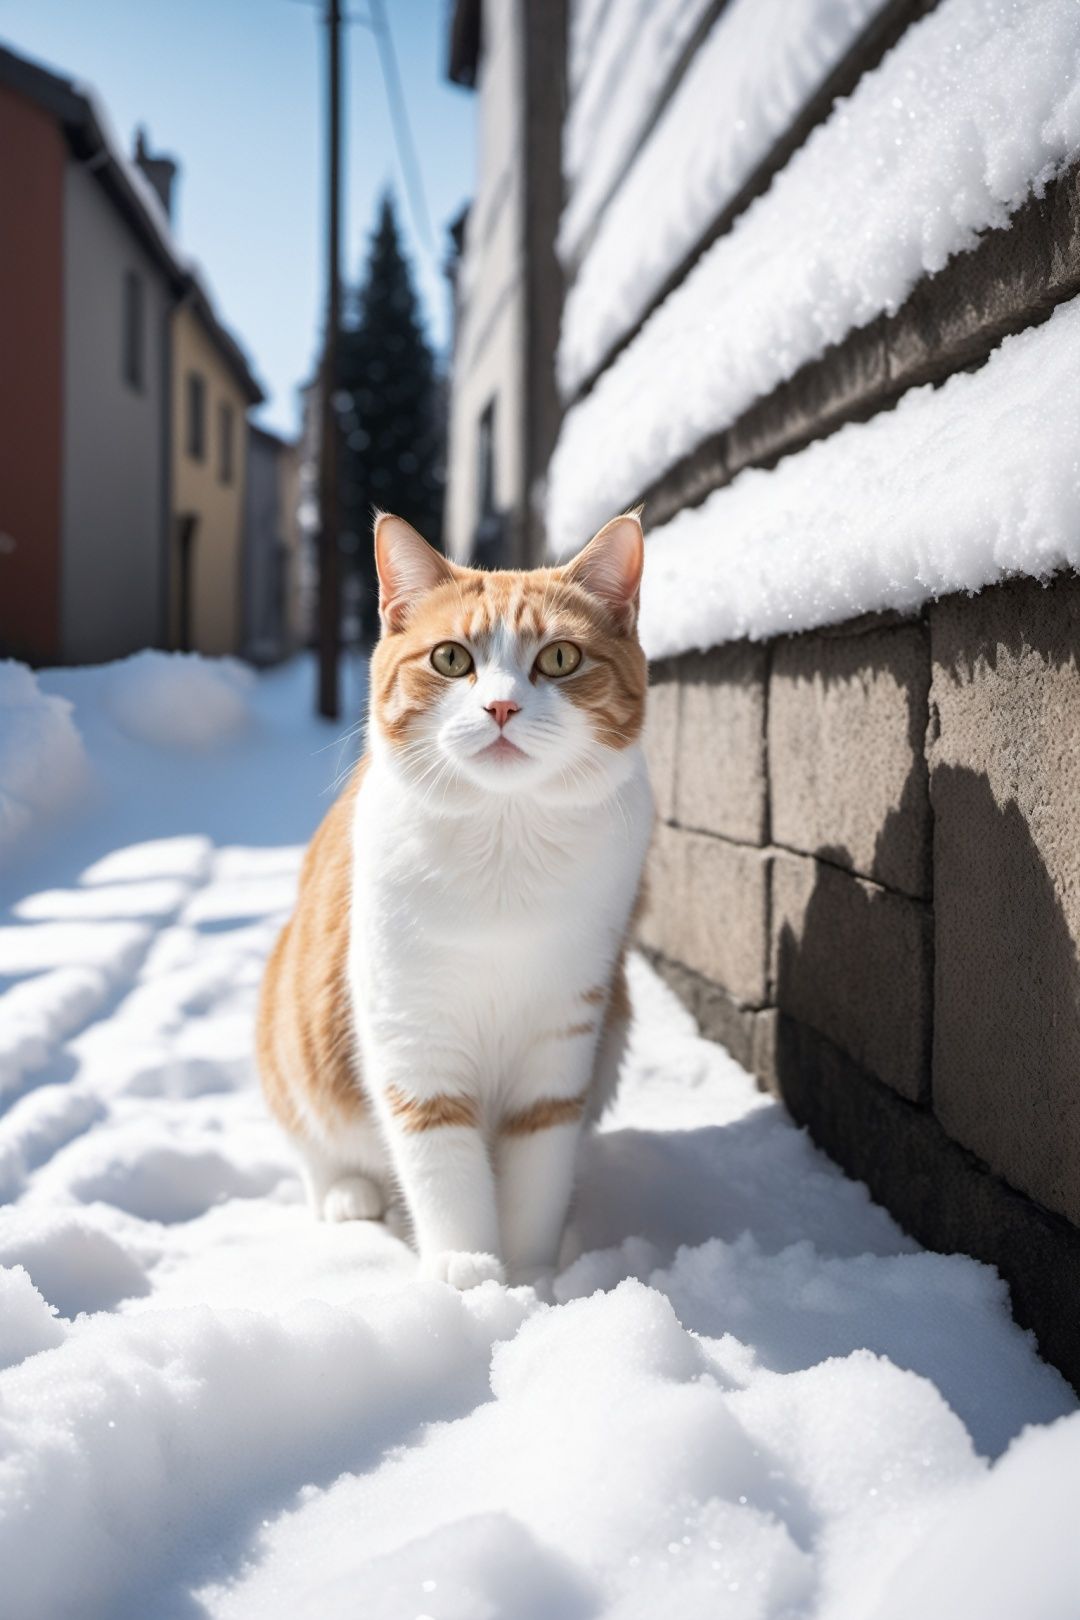  The snow is falling profusely, and a cold city wall, A cat is looking up at the wall outside. The ground is covered in snow, with snowflakes falling one by one, Camera capture, realistic, photography works, perfect composition, and a sense of hierarchy of light and shadow,